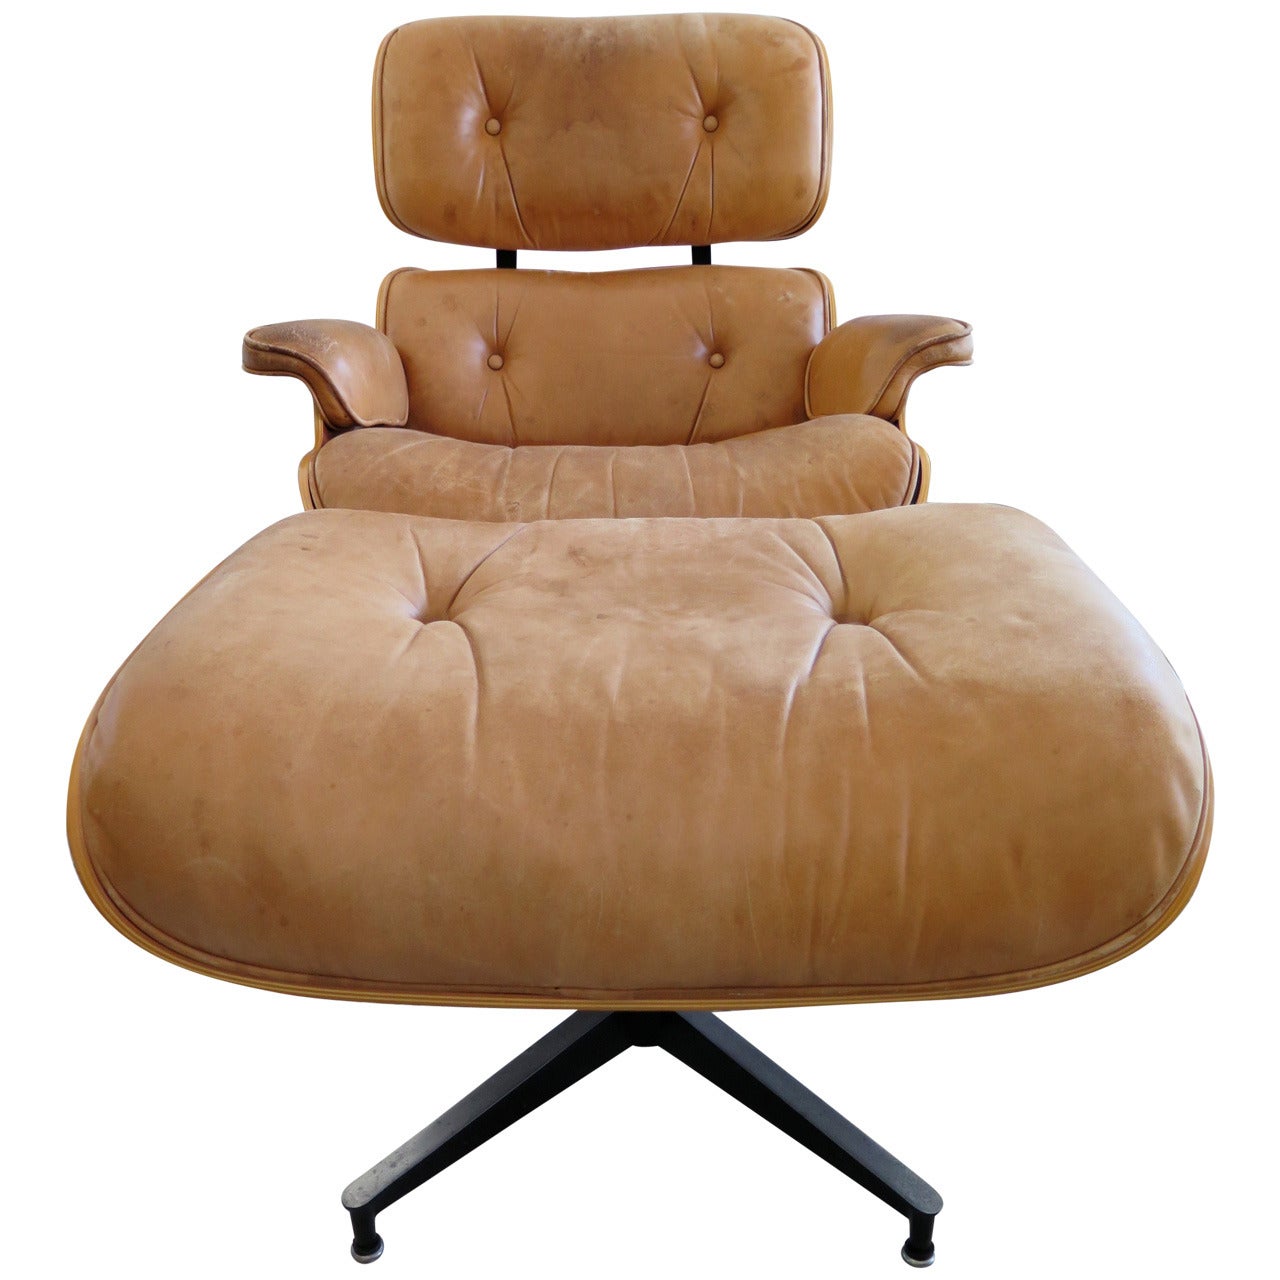 Charles Eames Herman Miller Lounge Chair with Two Ottomans